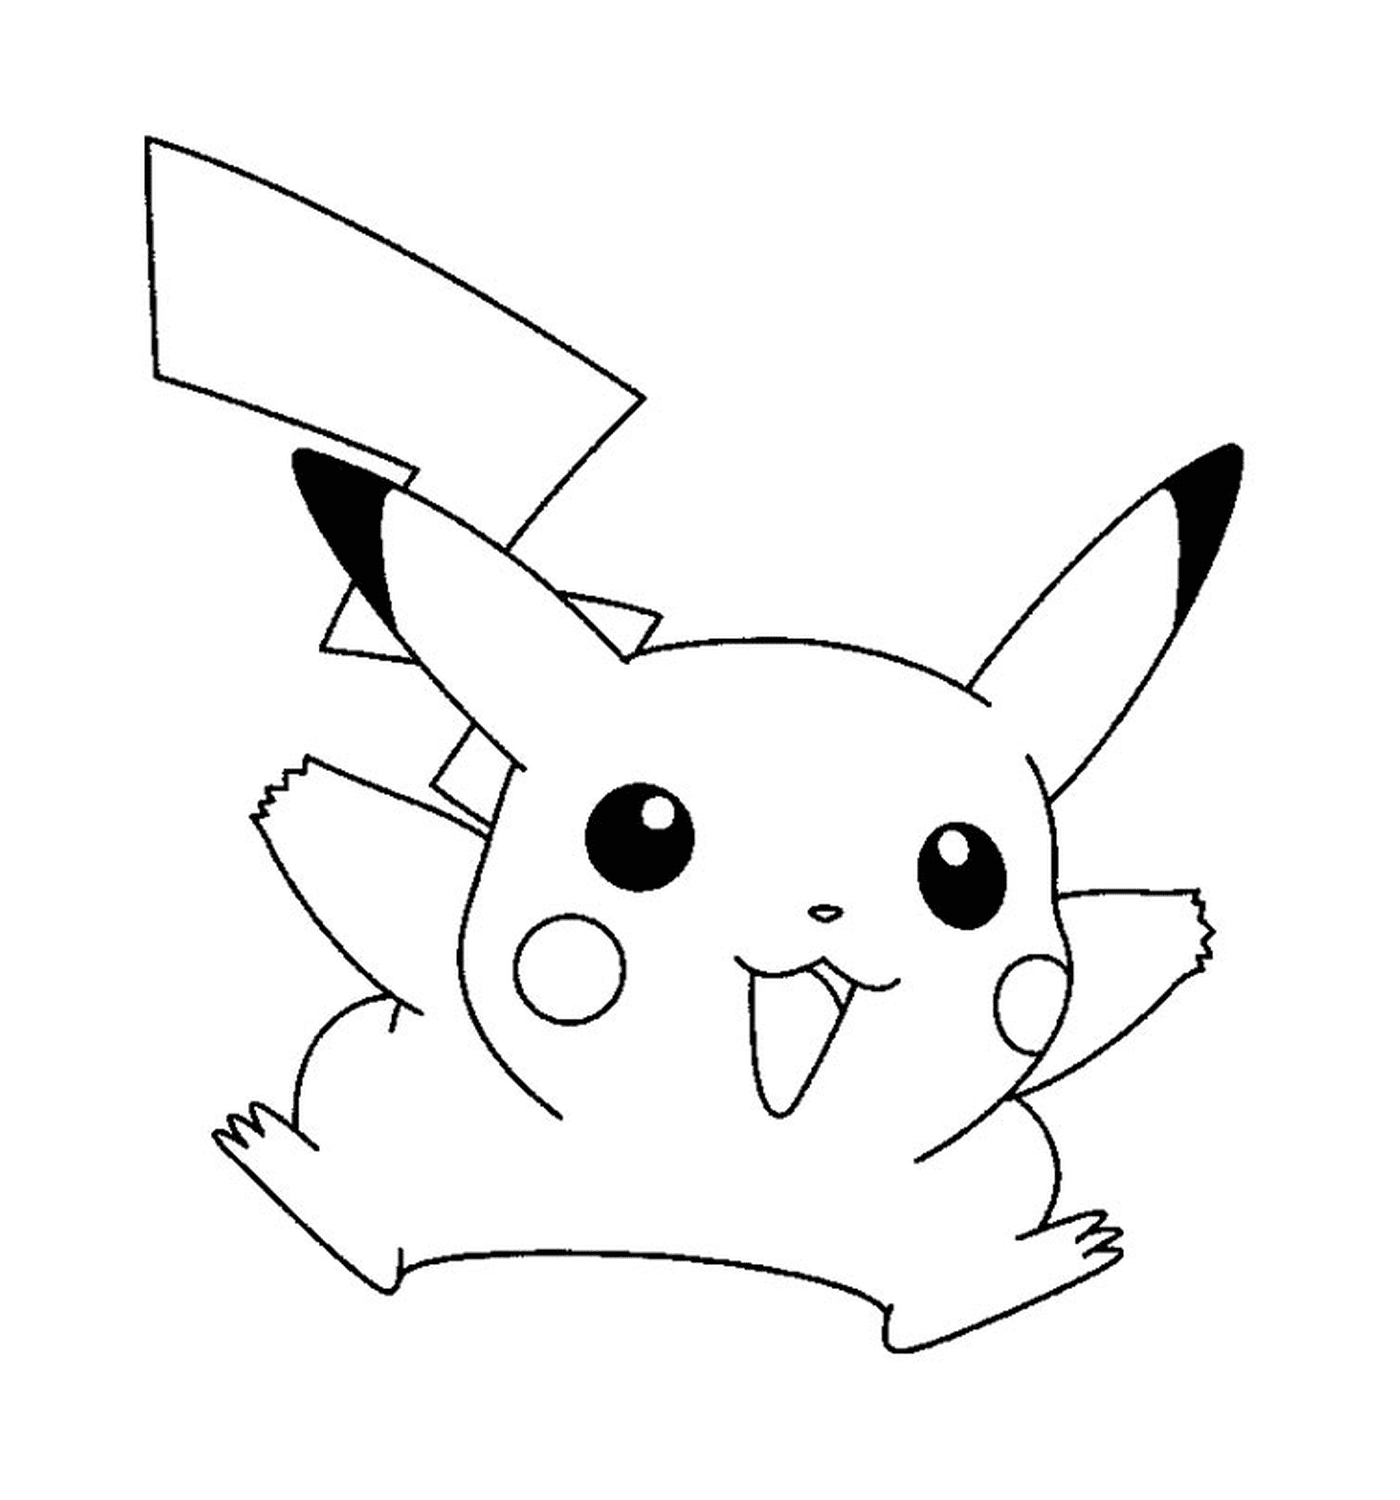  Pikachu cute and easy to draw 